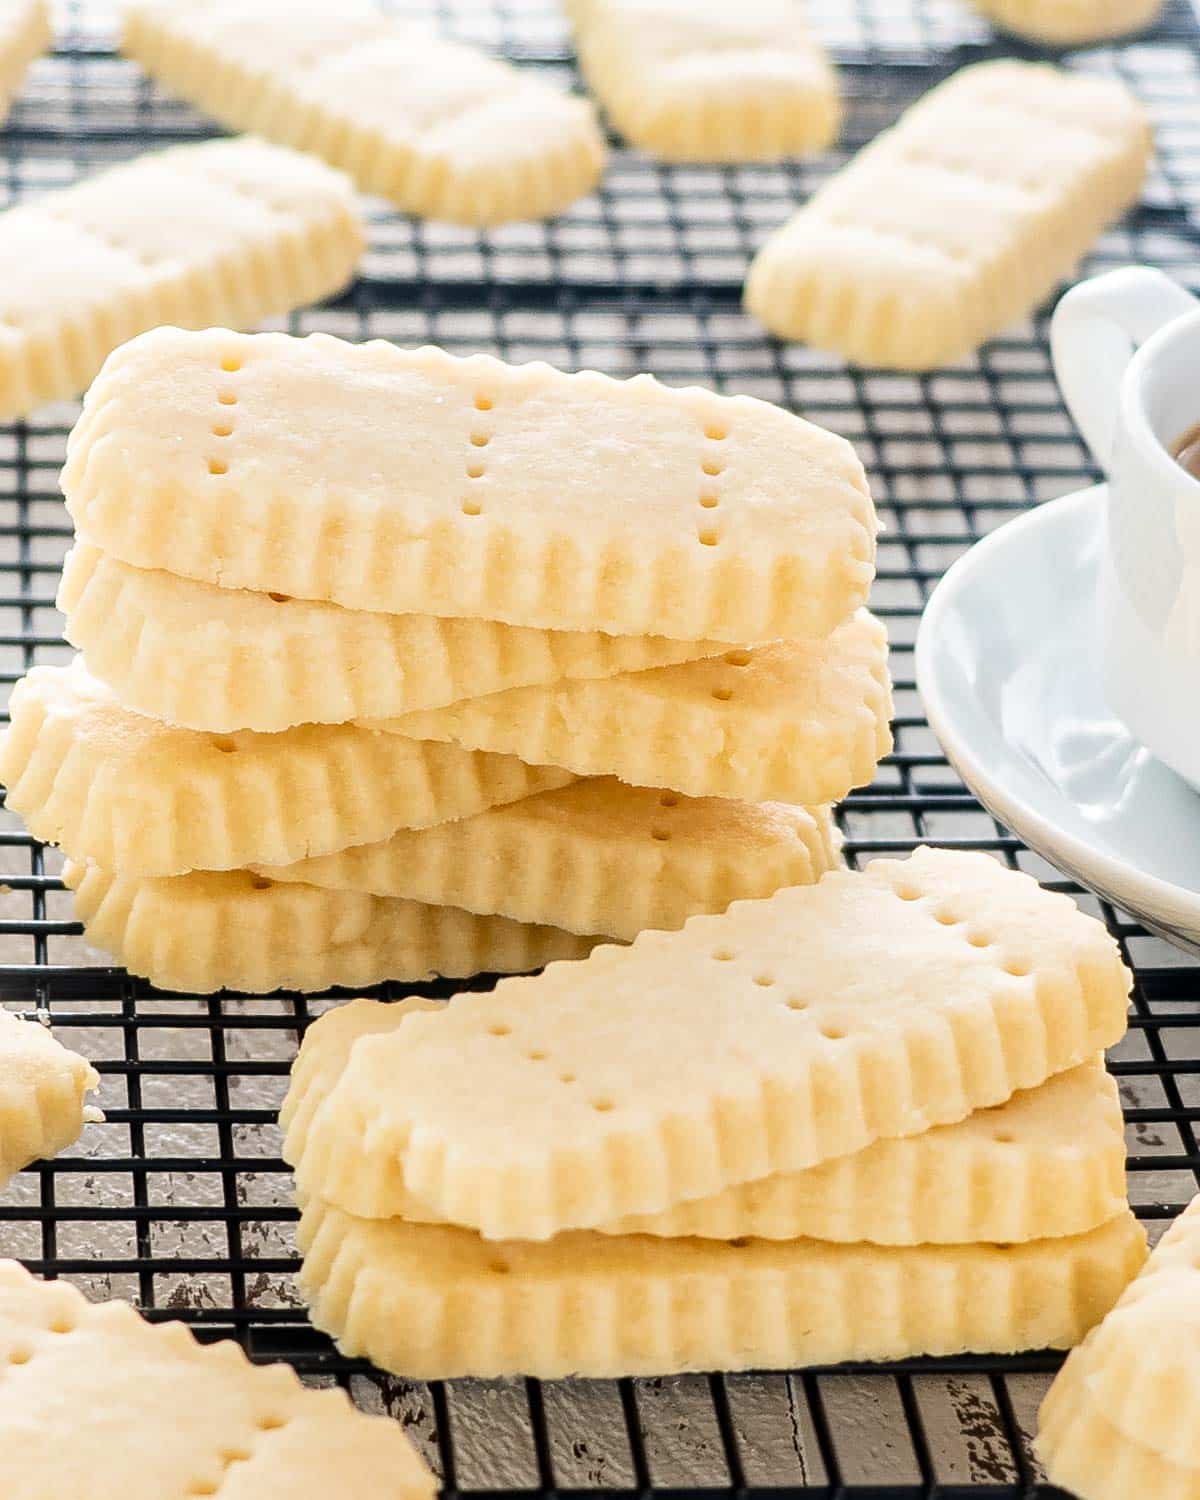 Classic Shortbread Cookie Recipe (Only 4 Ingredients!)